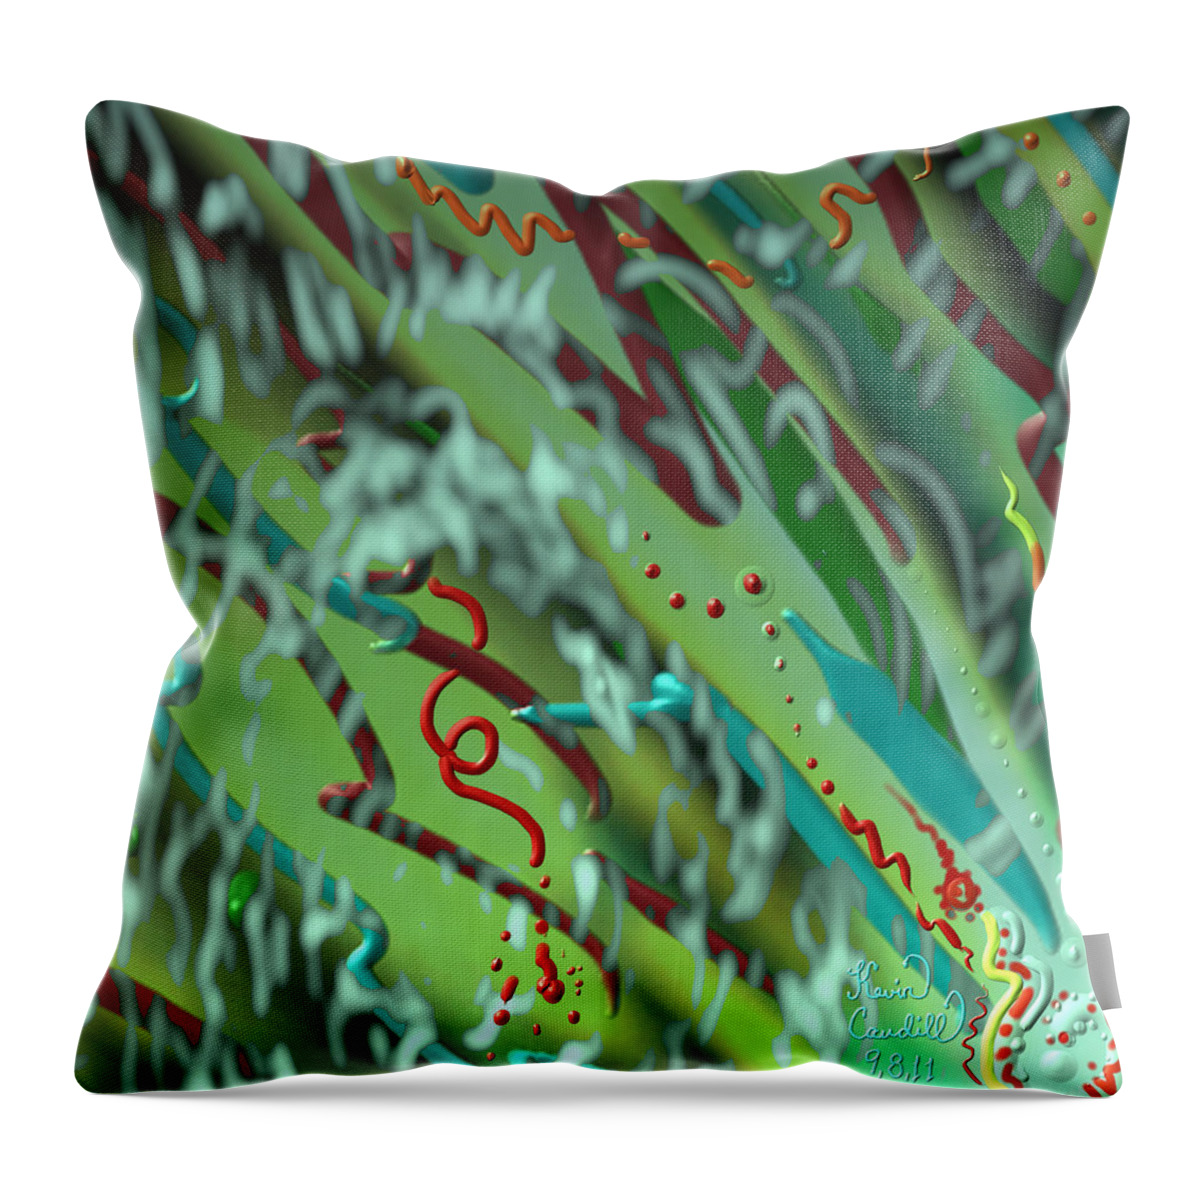 Waves Throw Pillow featuring the mixed media Signs Of Life by Kevin Caudill